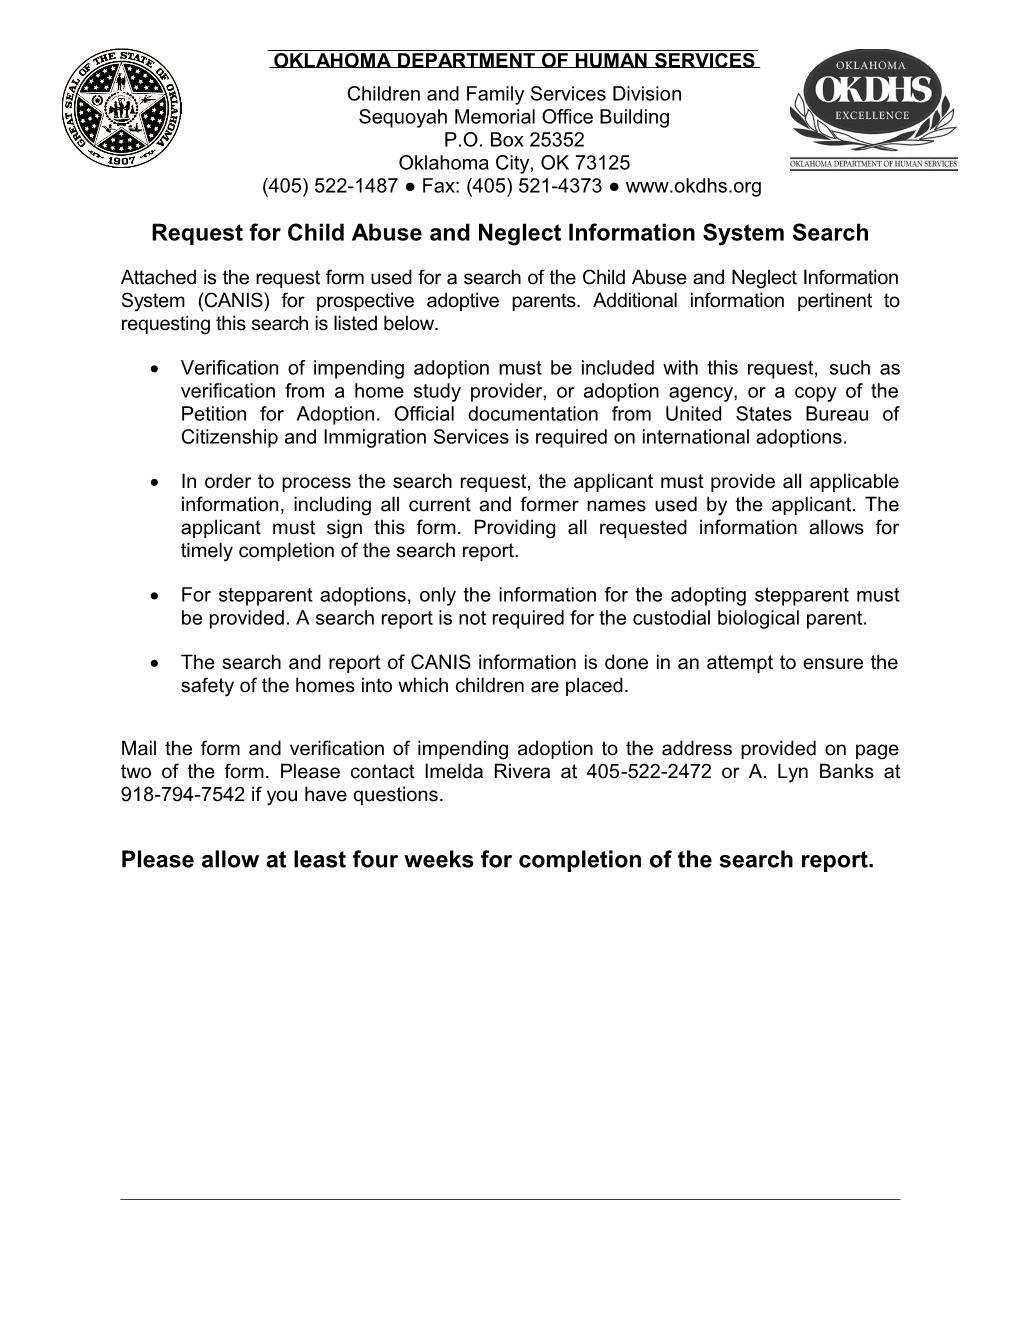 Request for Child Abuse and Neglect Information System Search